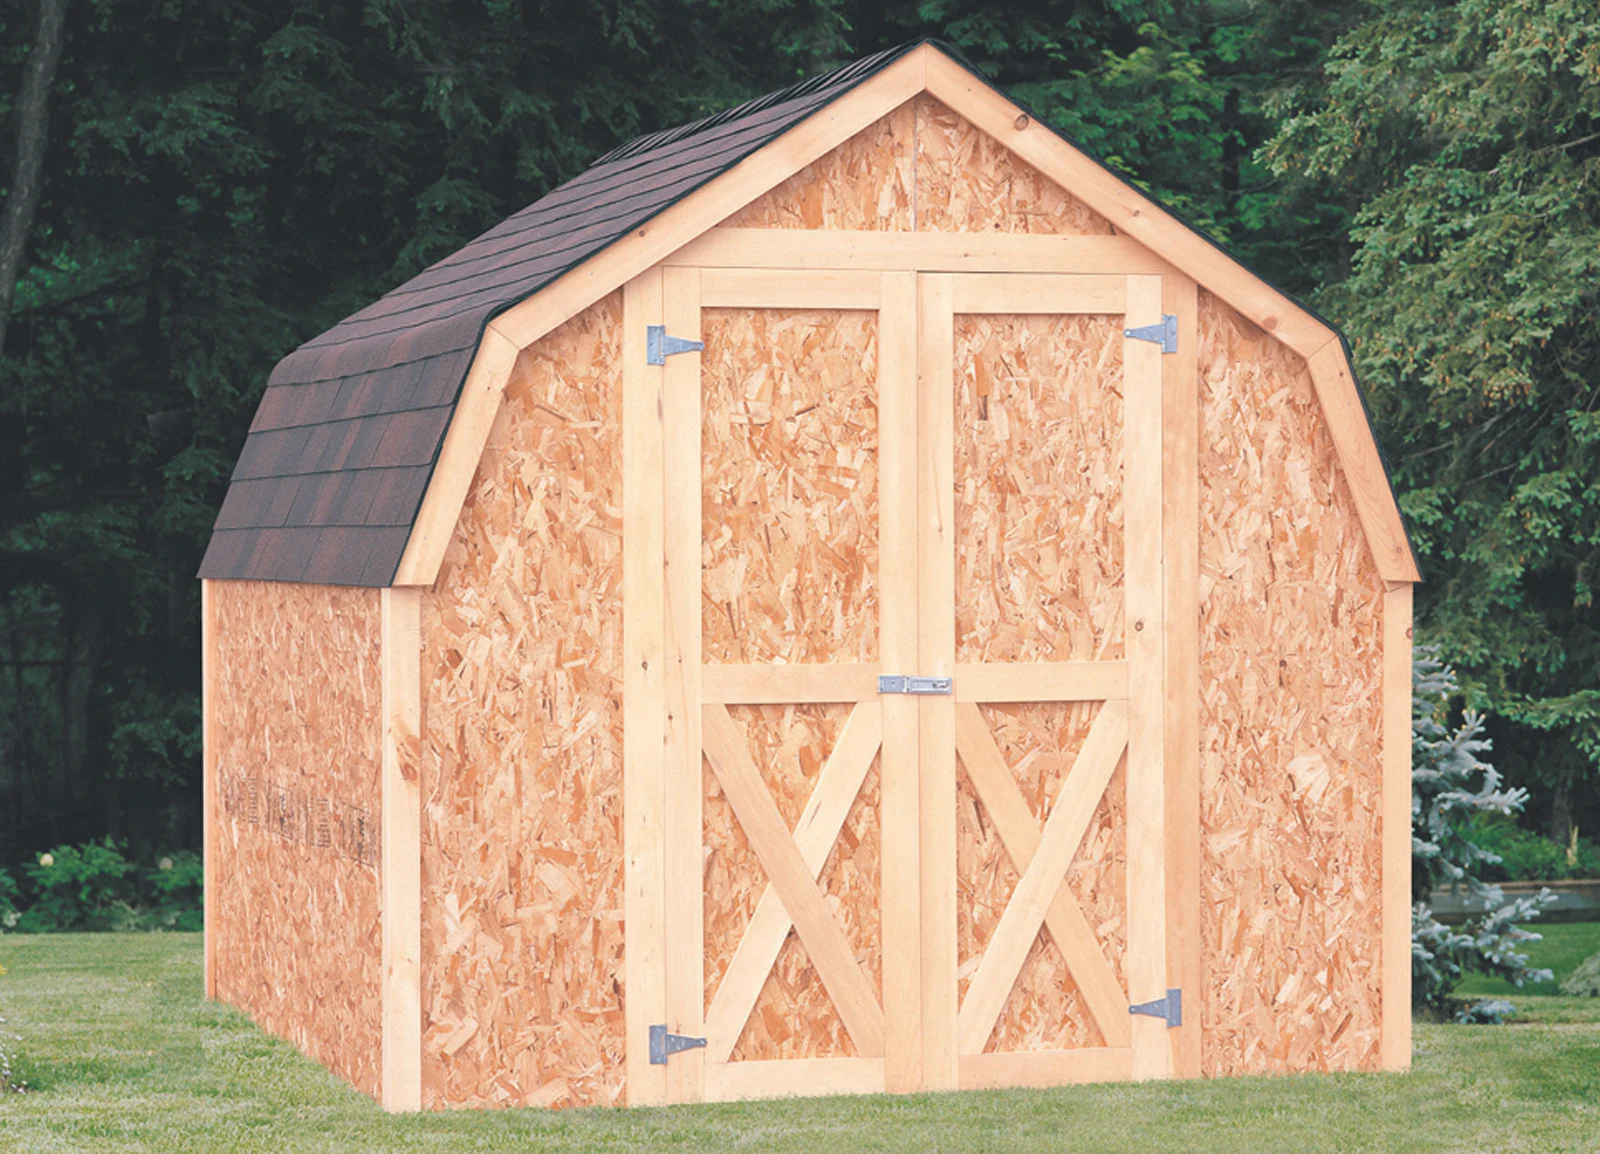 A barnstyle shed